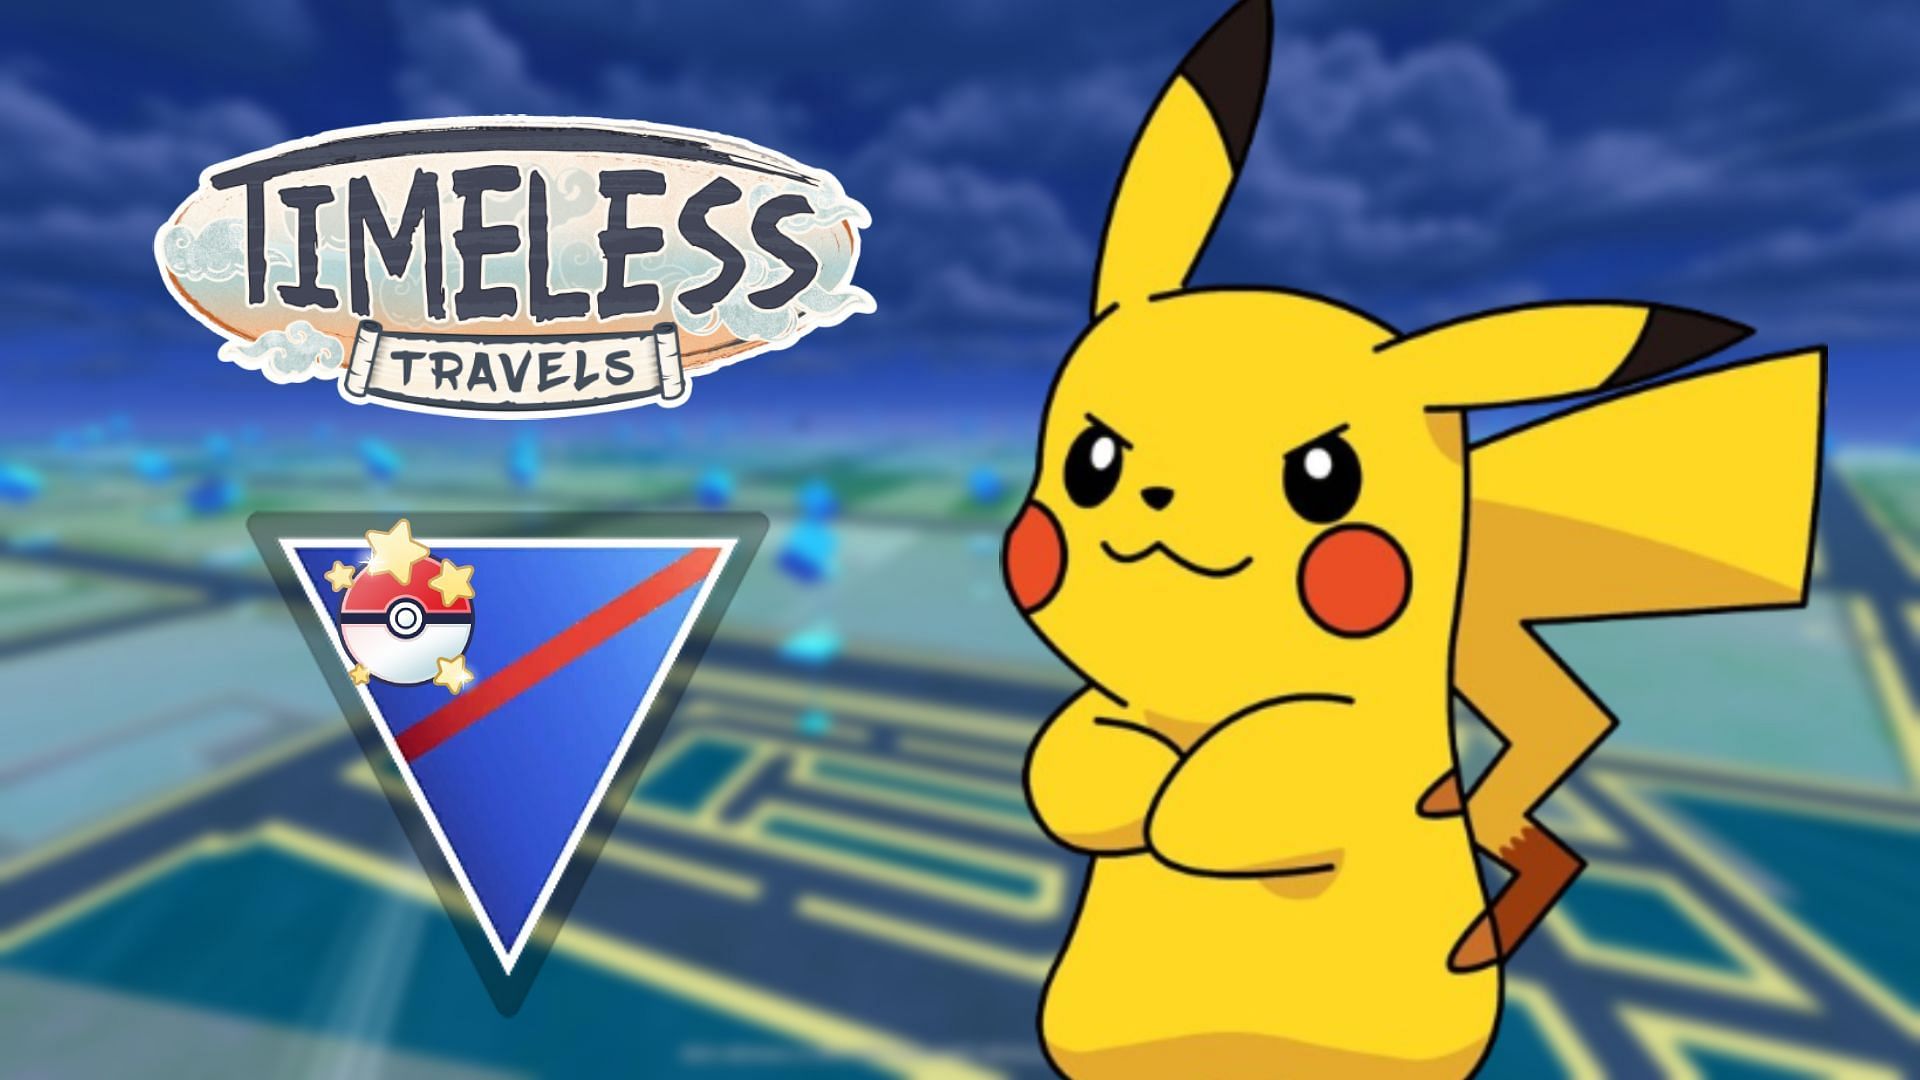 Best Catch Cup - Great League Edition teams for Pokemon GO Season of Timeless Travels